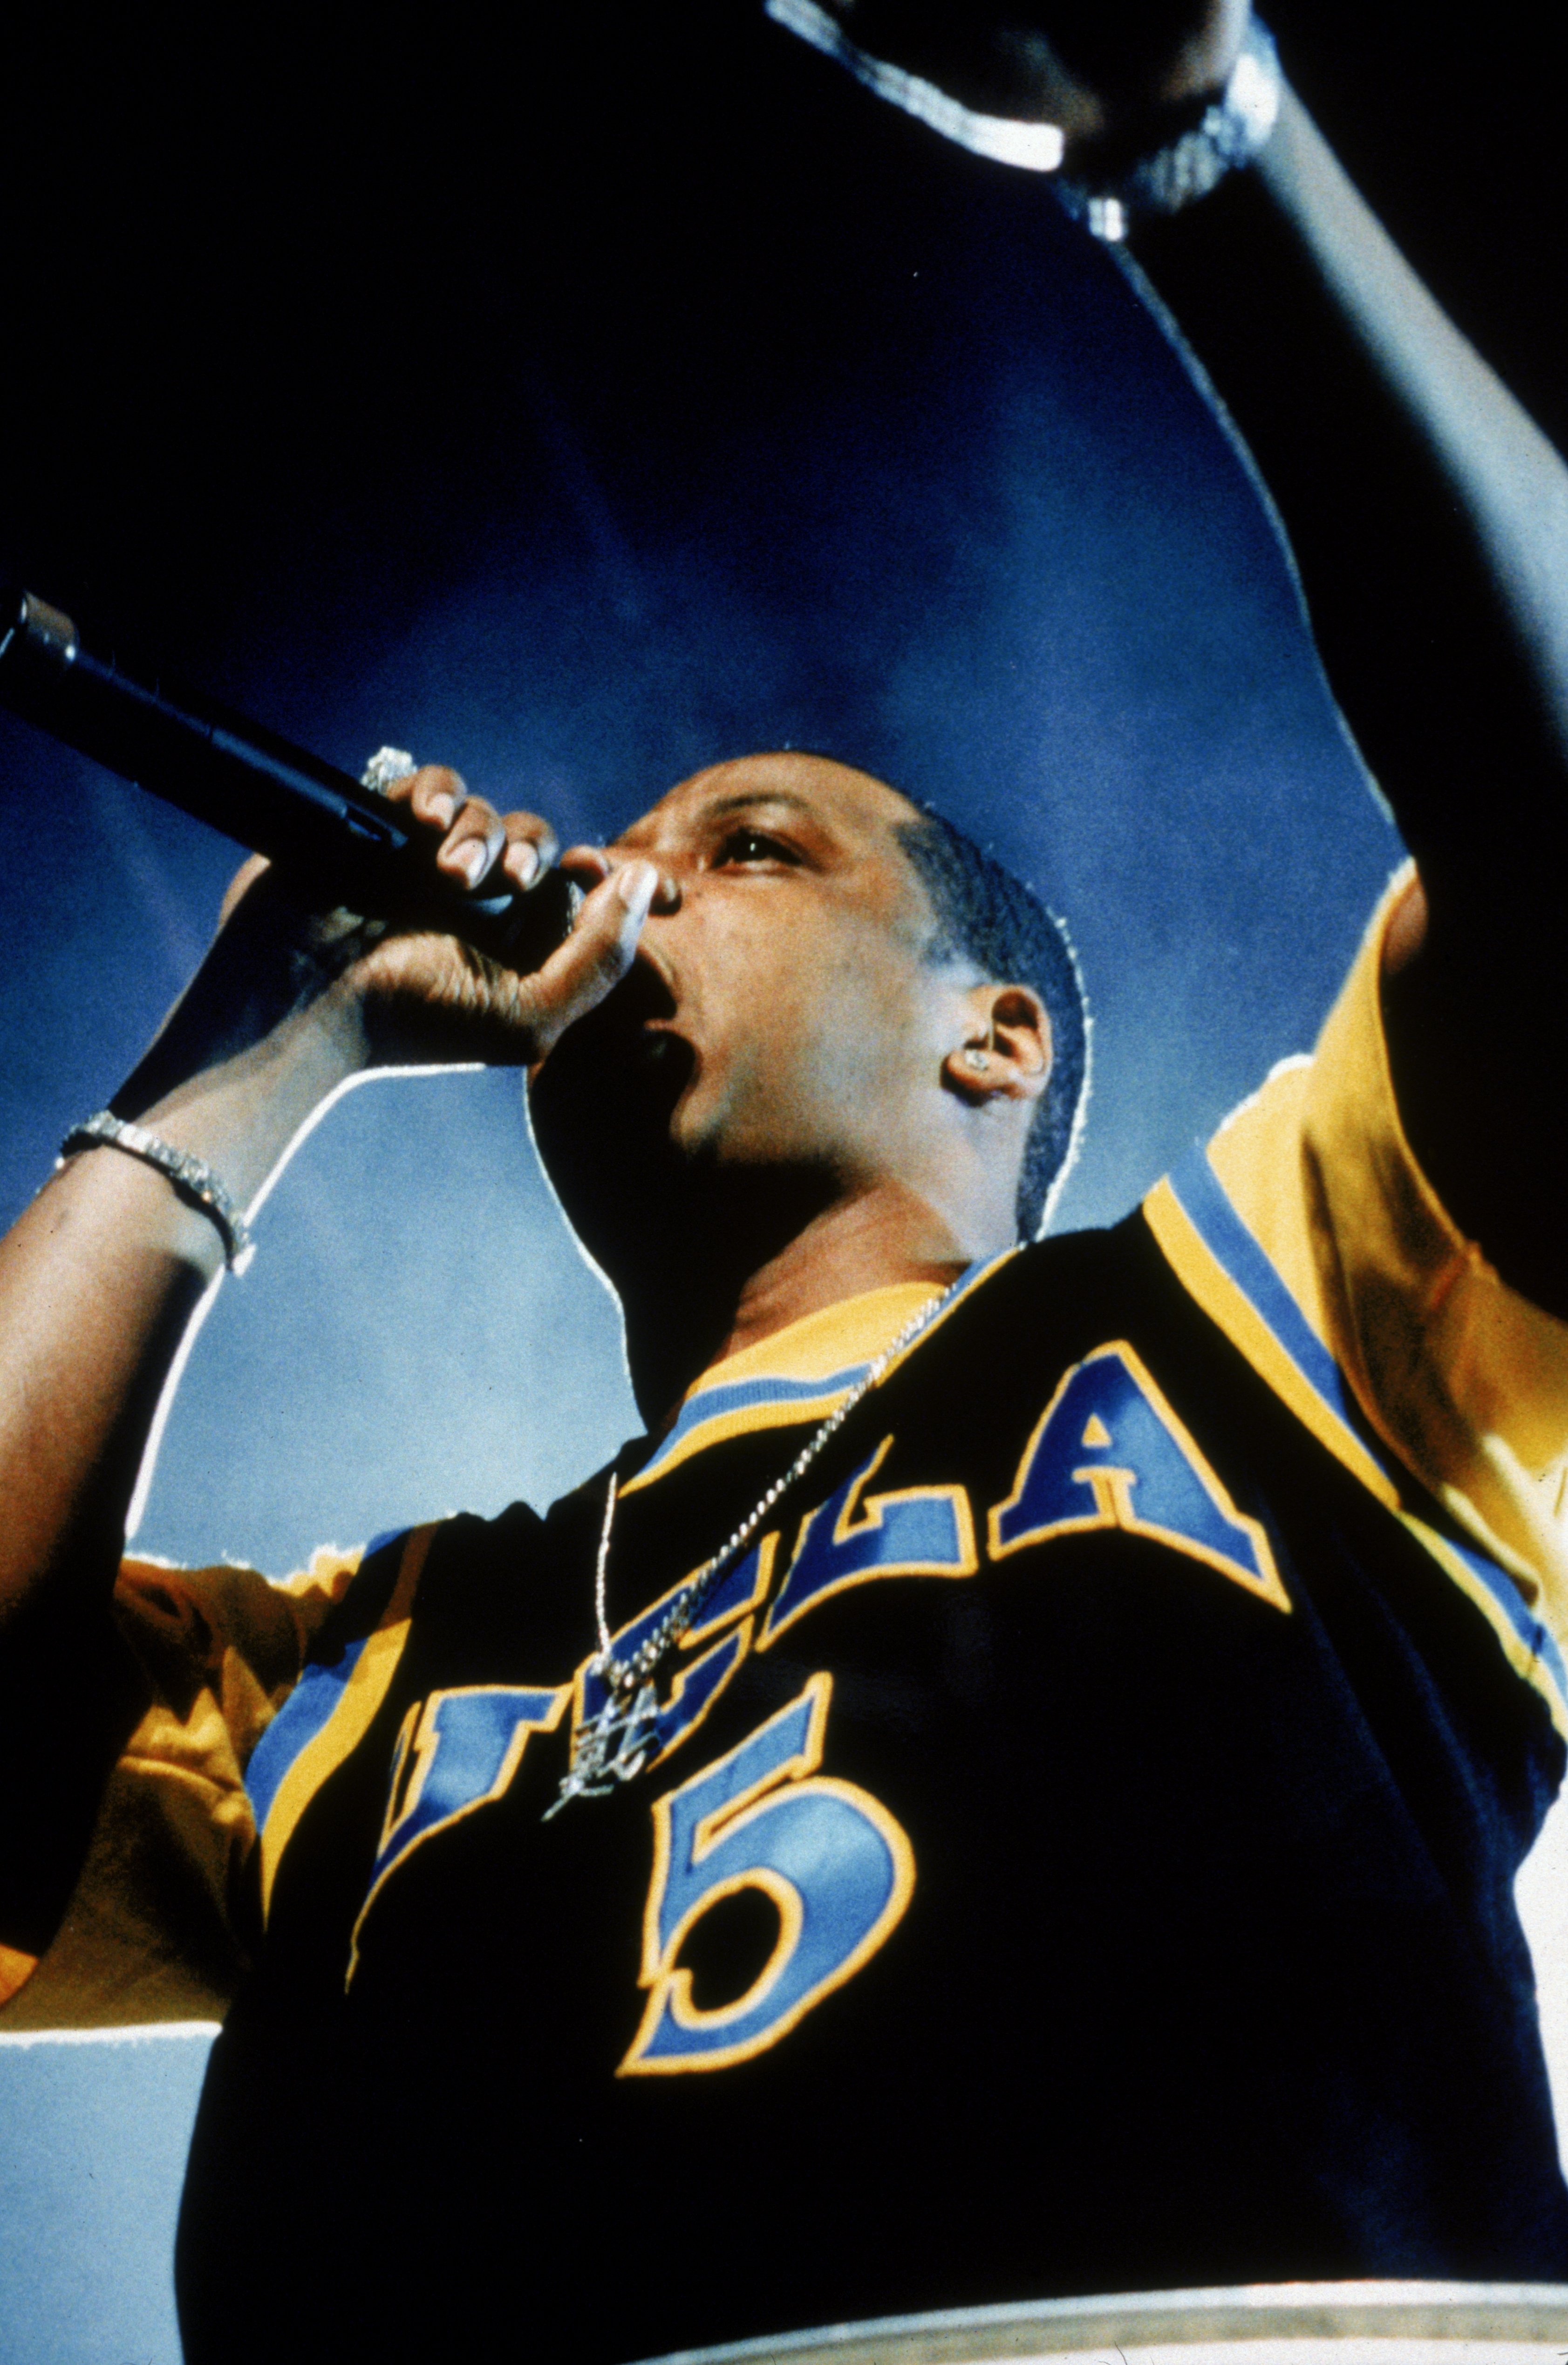 Jay-Z performs during the 'Hard Knock Life' tour at the Thomas & Mack Arena in Las Vegas, Nevada, on April 18, 1999. | Source: Getty Images